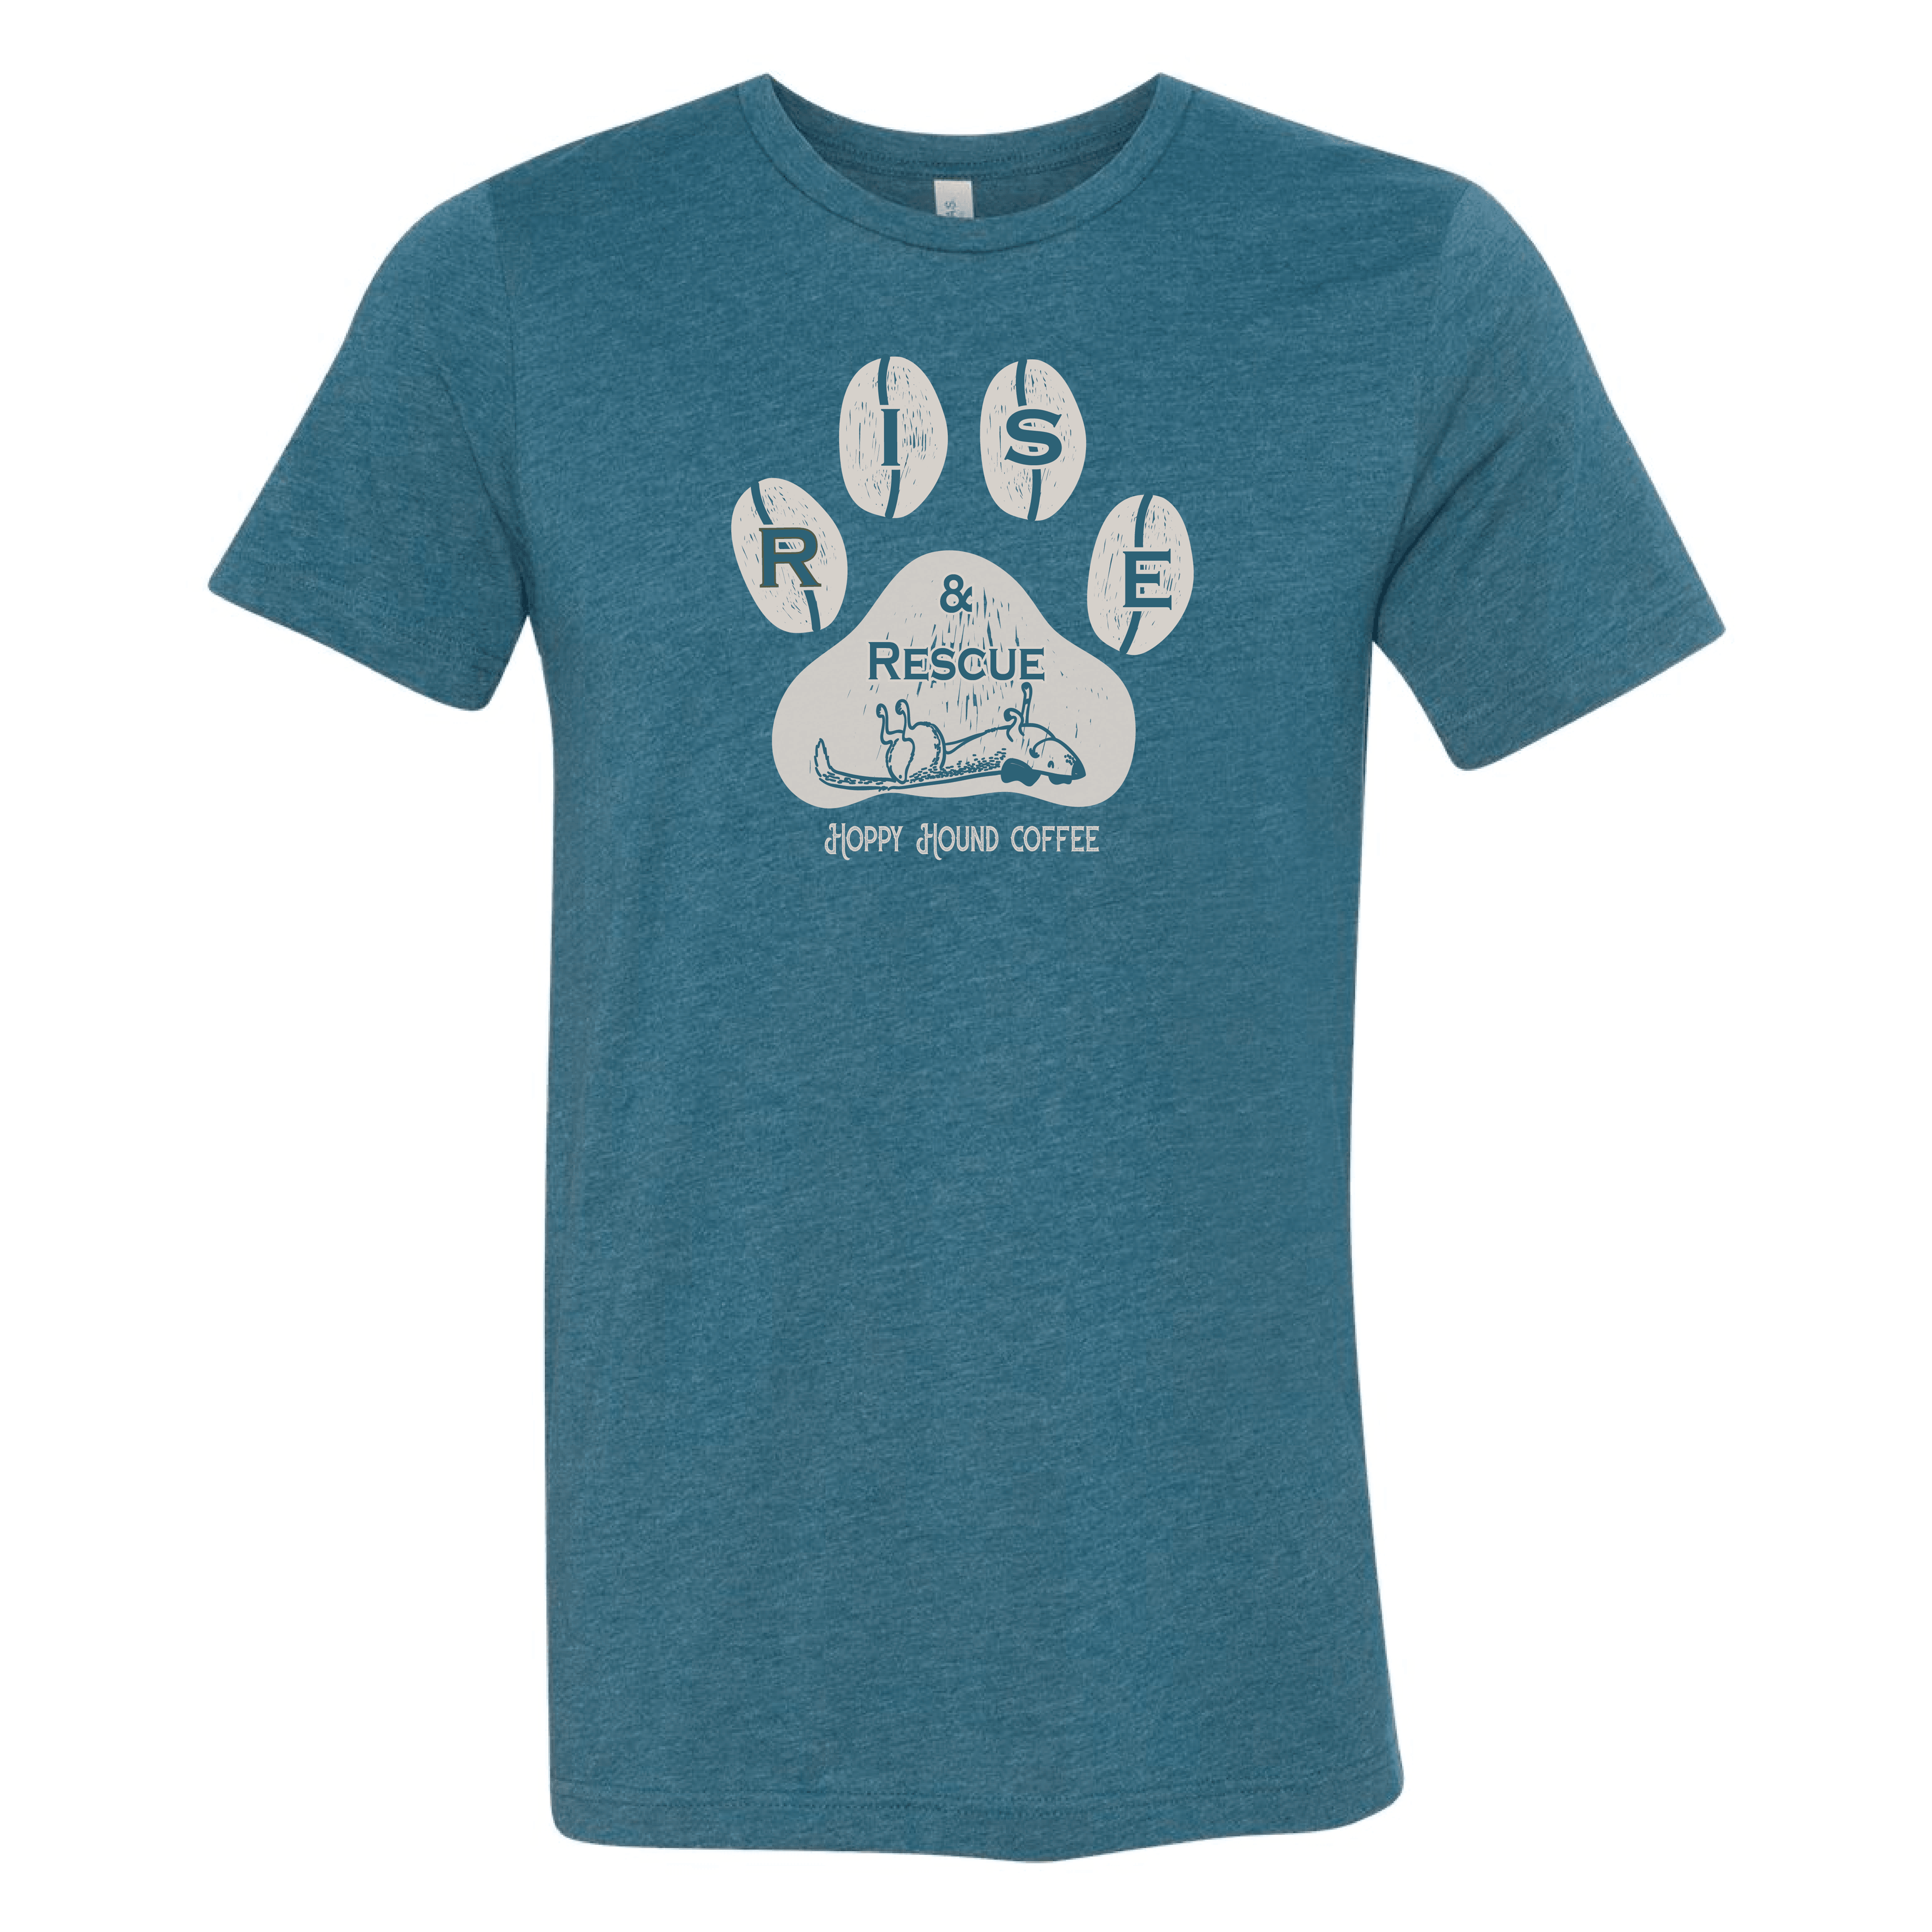 Rise and Rescue T-Shirt - Ales to Trails